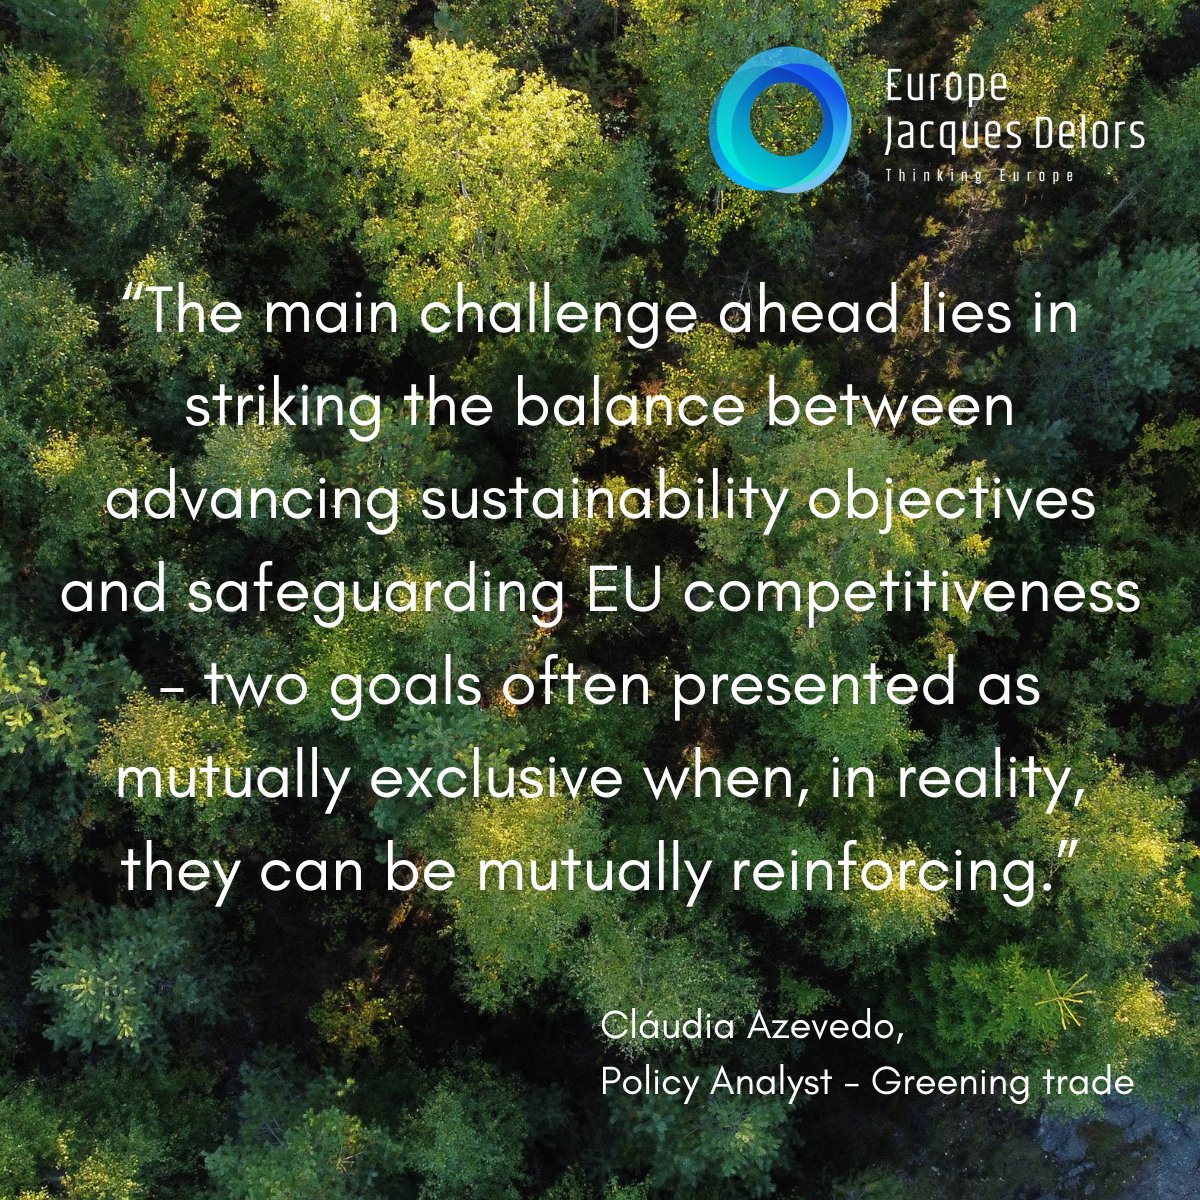 🇪🇺As we approach the #EuropeanElections, our analysts discuss some of the risks that the #GreenDeal may face in the new mandate. 📢Stay tuned for part 2 to read our recommendations for an ambitious #sustainability agenda in the next mandate. 👉europejacquesdelors.eu/news/what-will… #blogpost